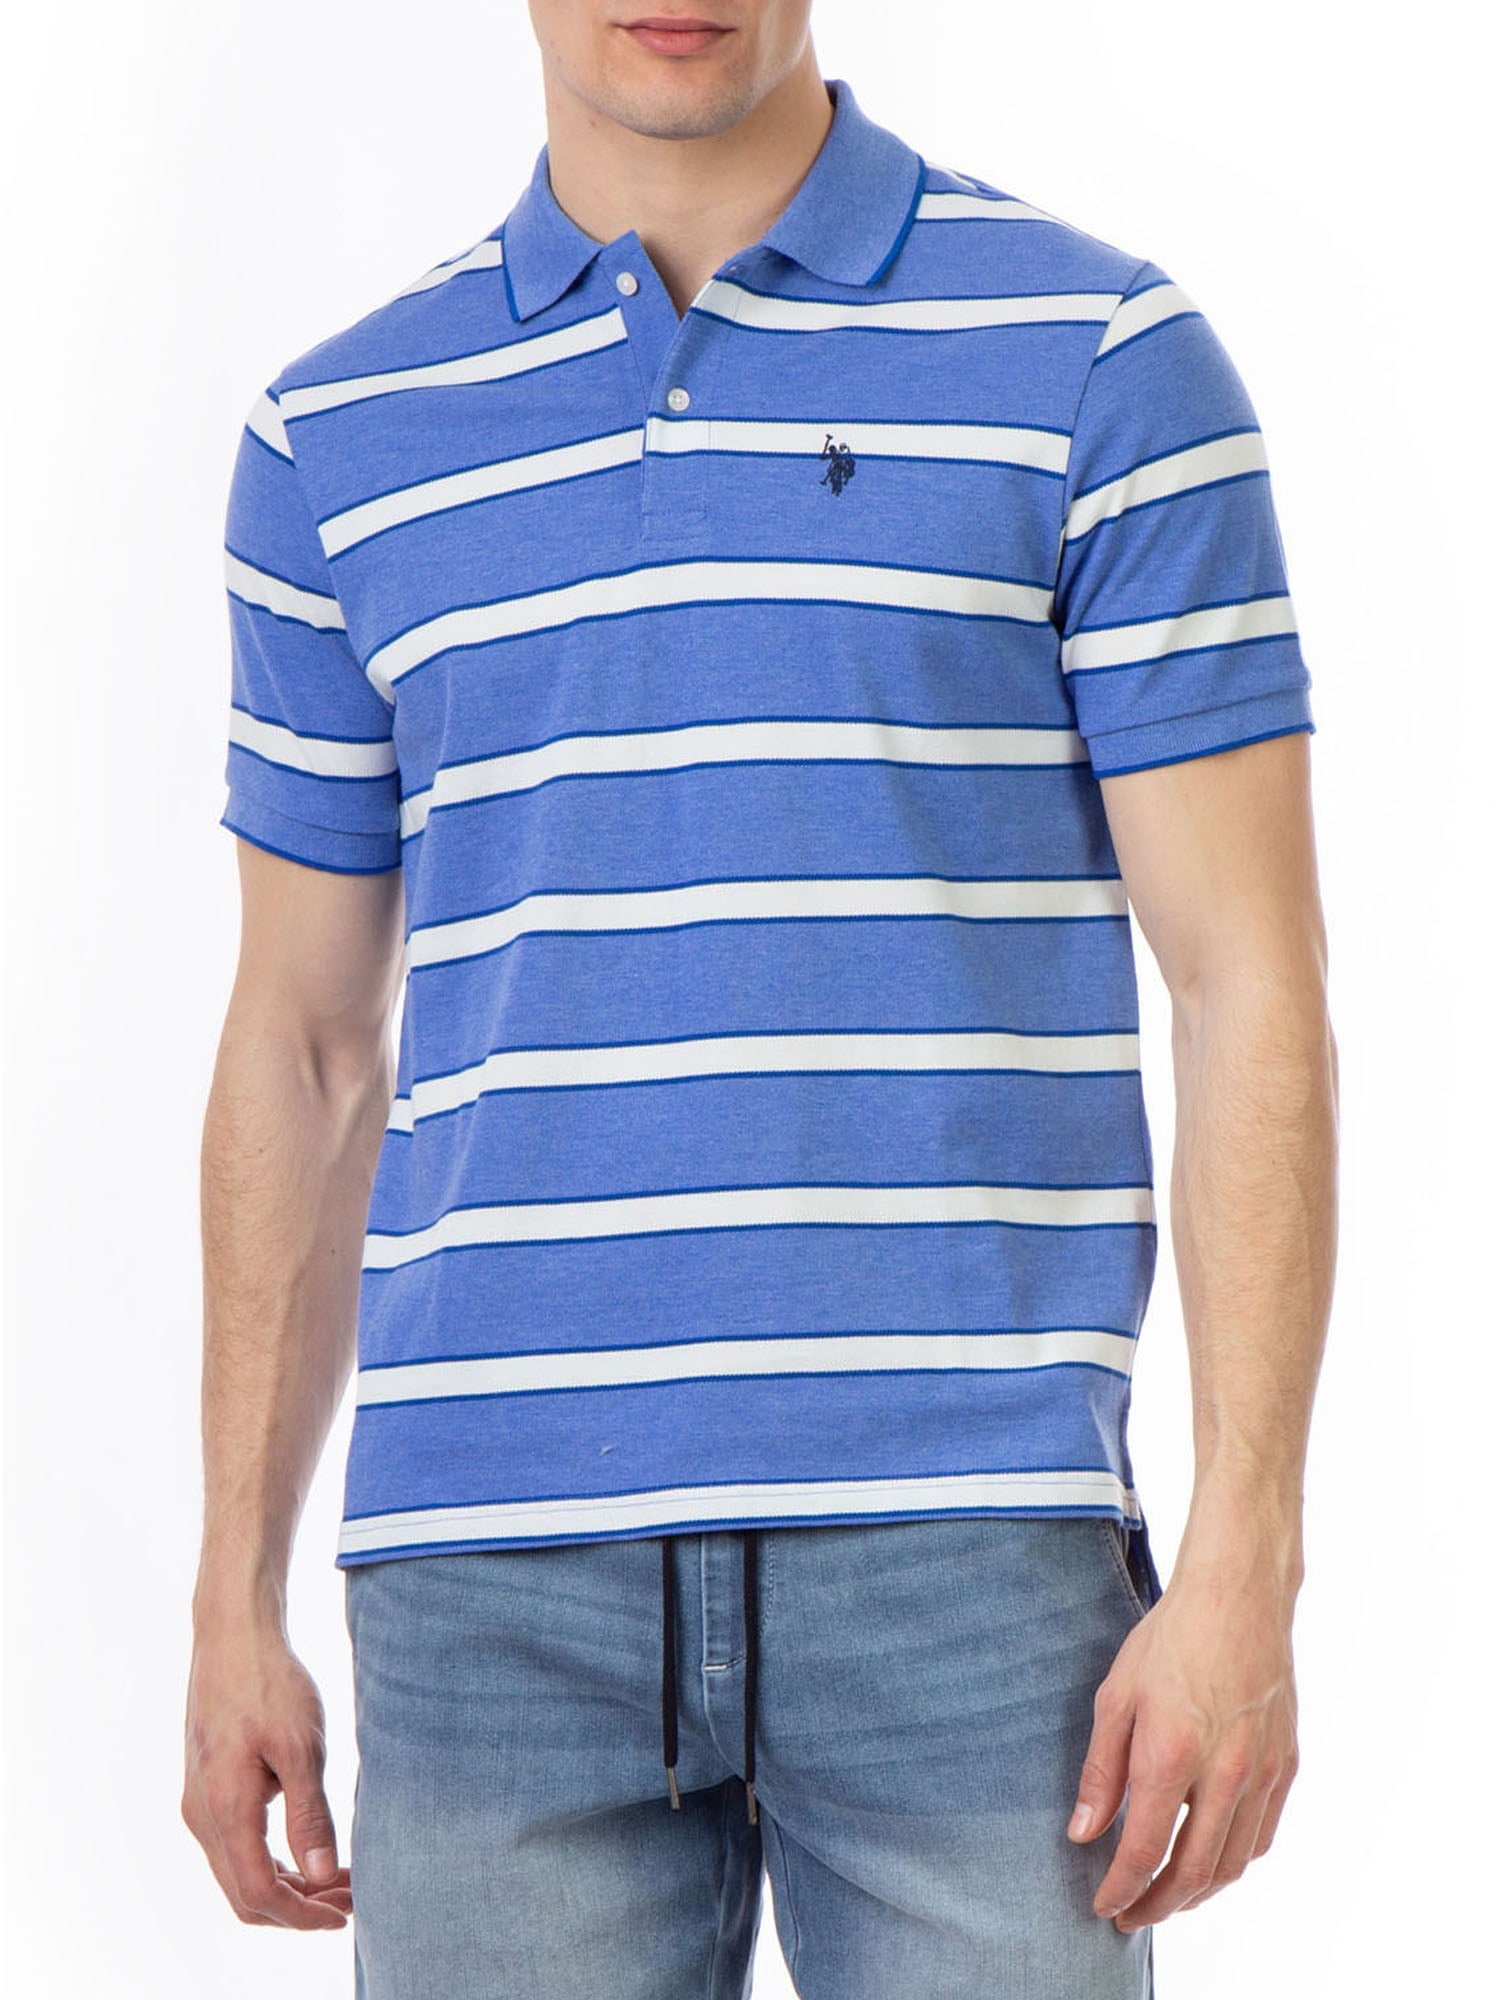 Fieer Mens Standard-fit Chic Soft Stripes Printed Short Sleeve Polo Shirt Tees